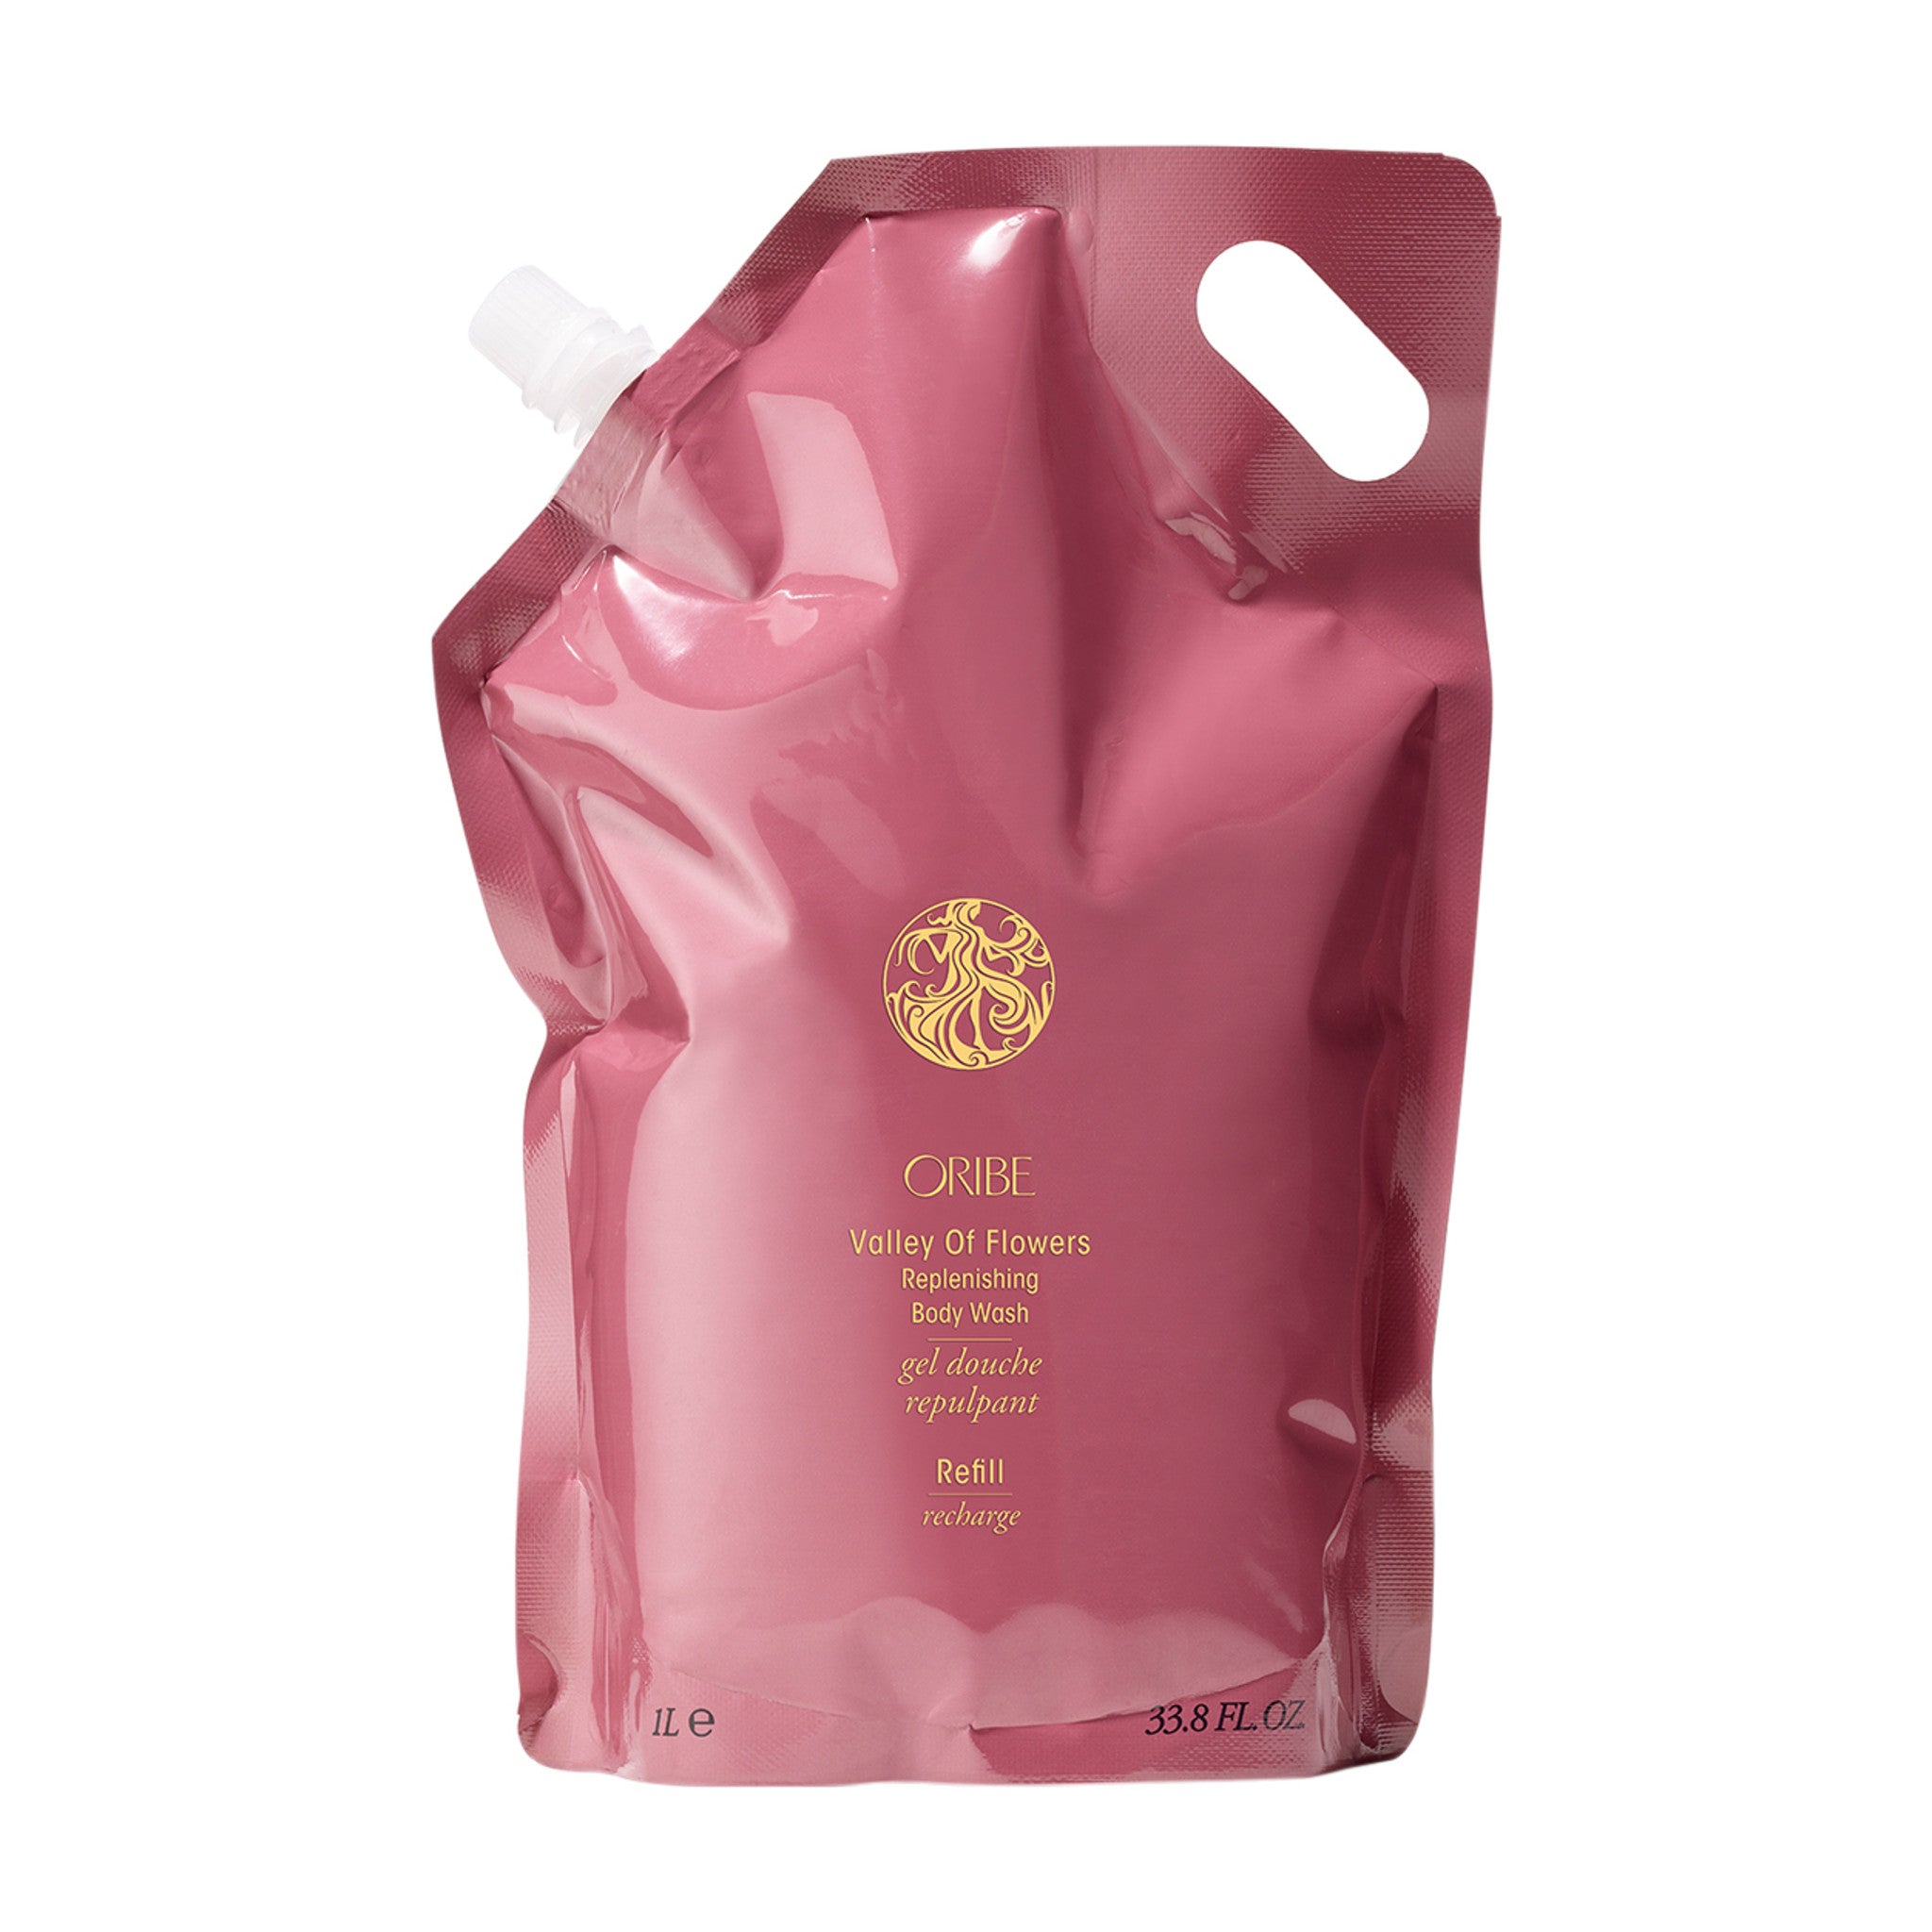 Oribe Valley of Flowers Body Crème Refill main image.